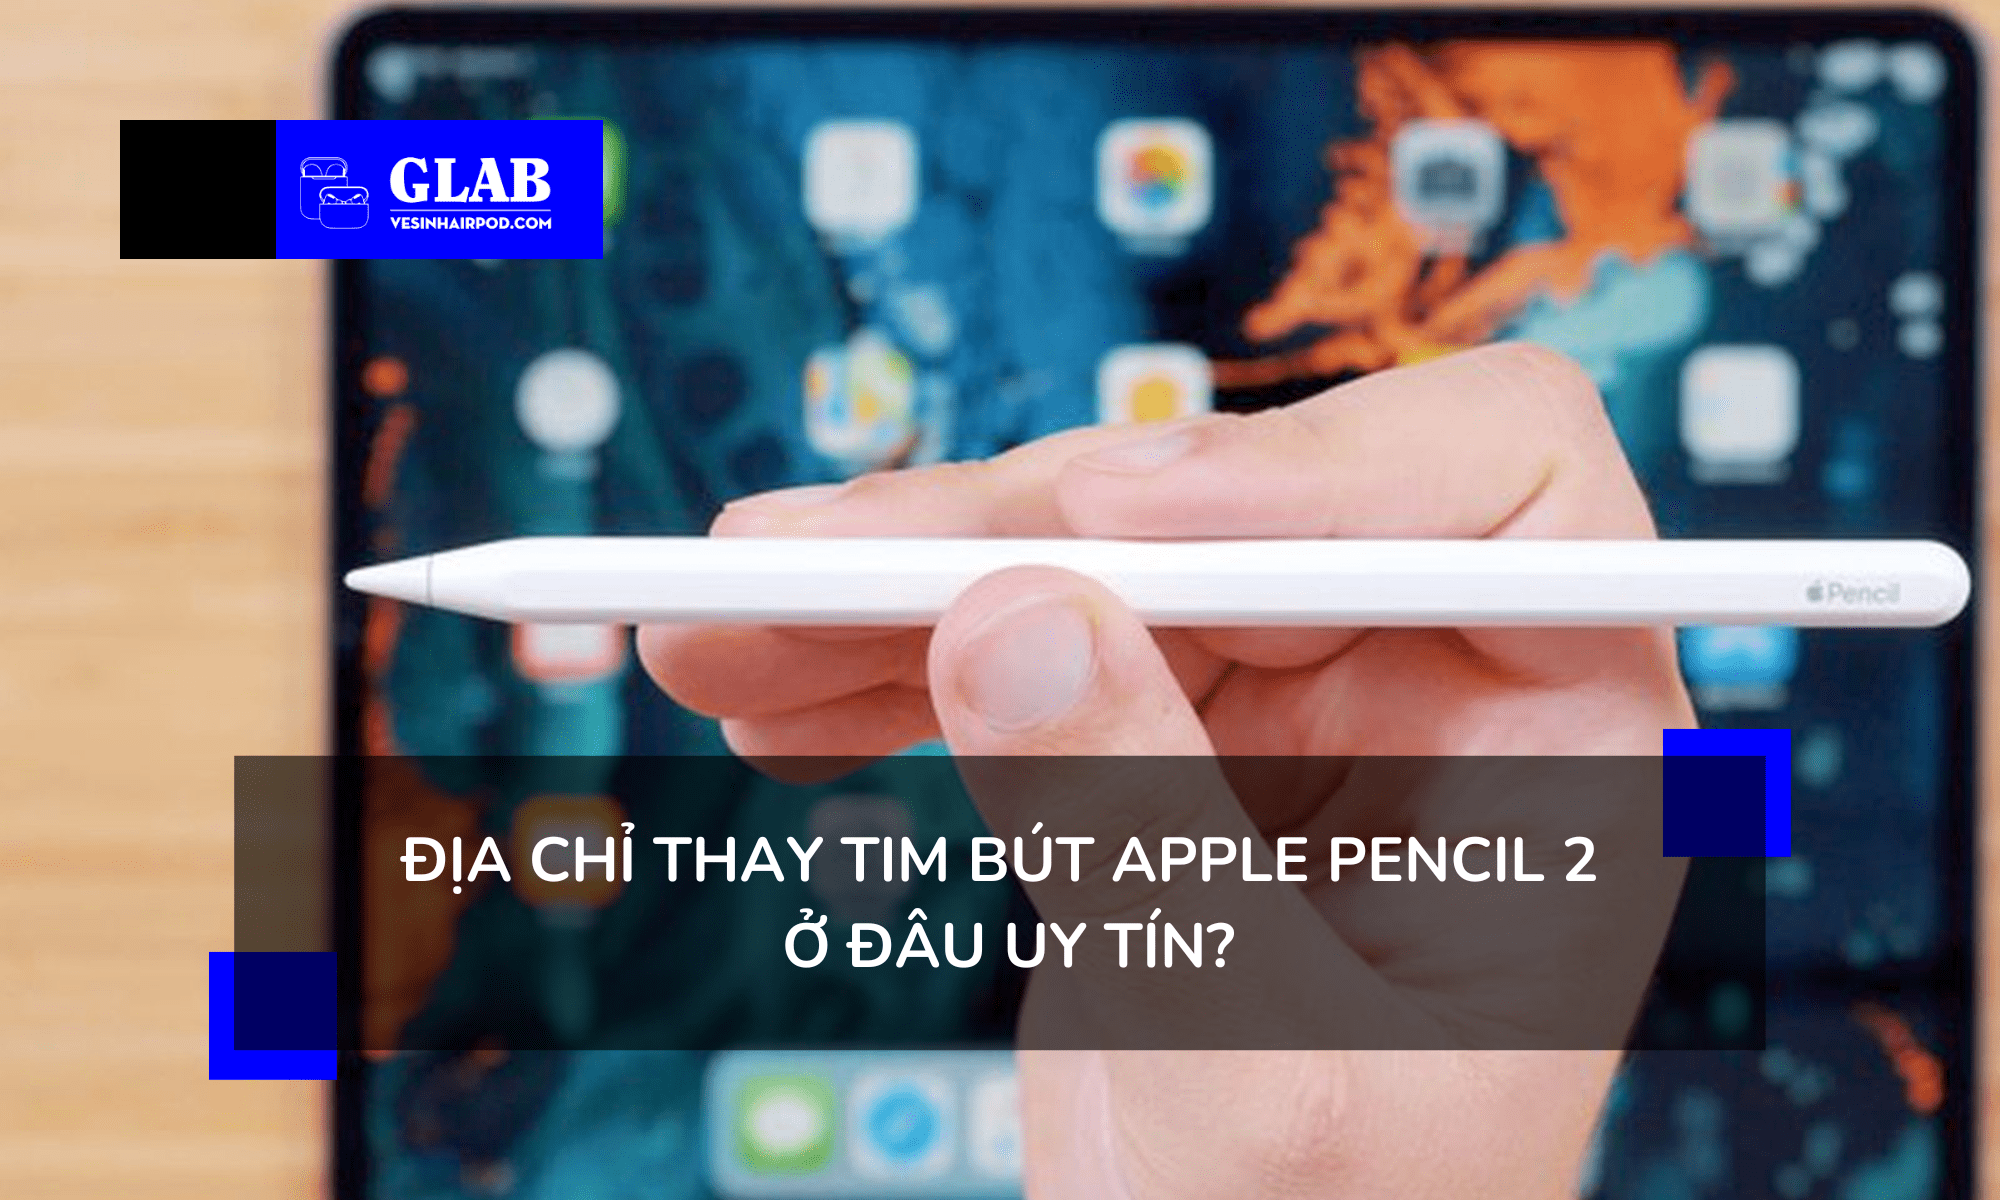 thay-tim-but-apple-pencil-2